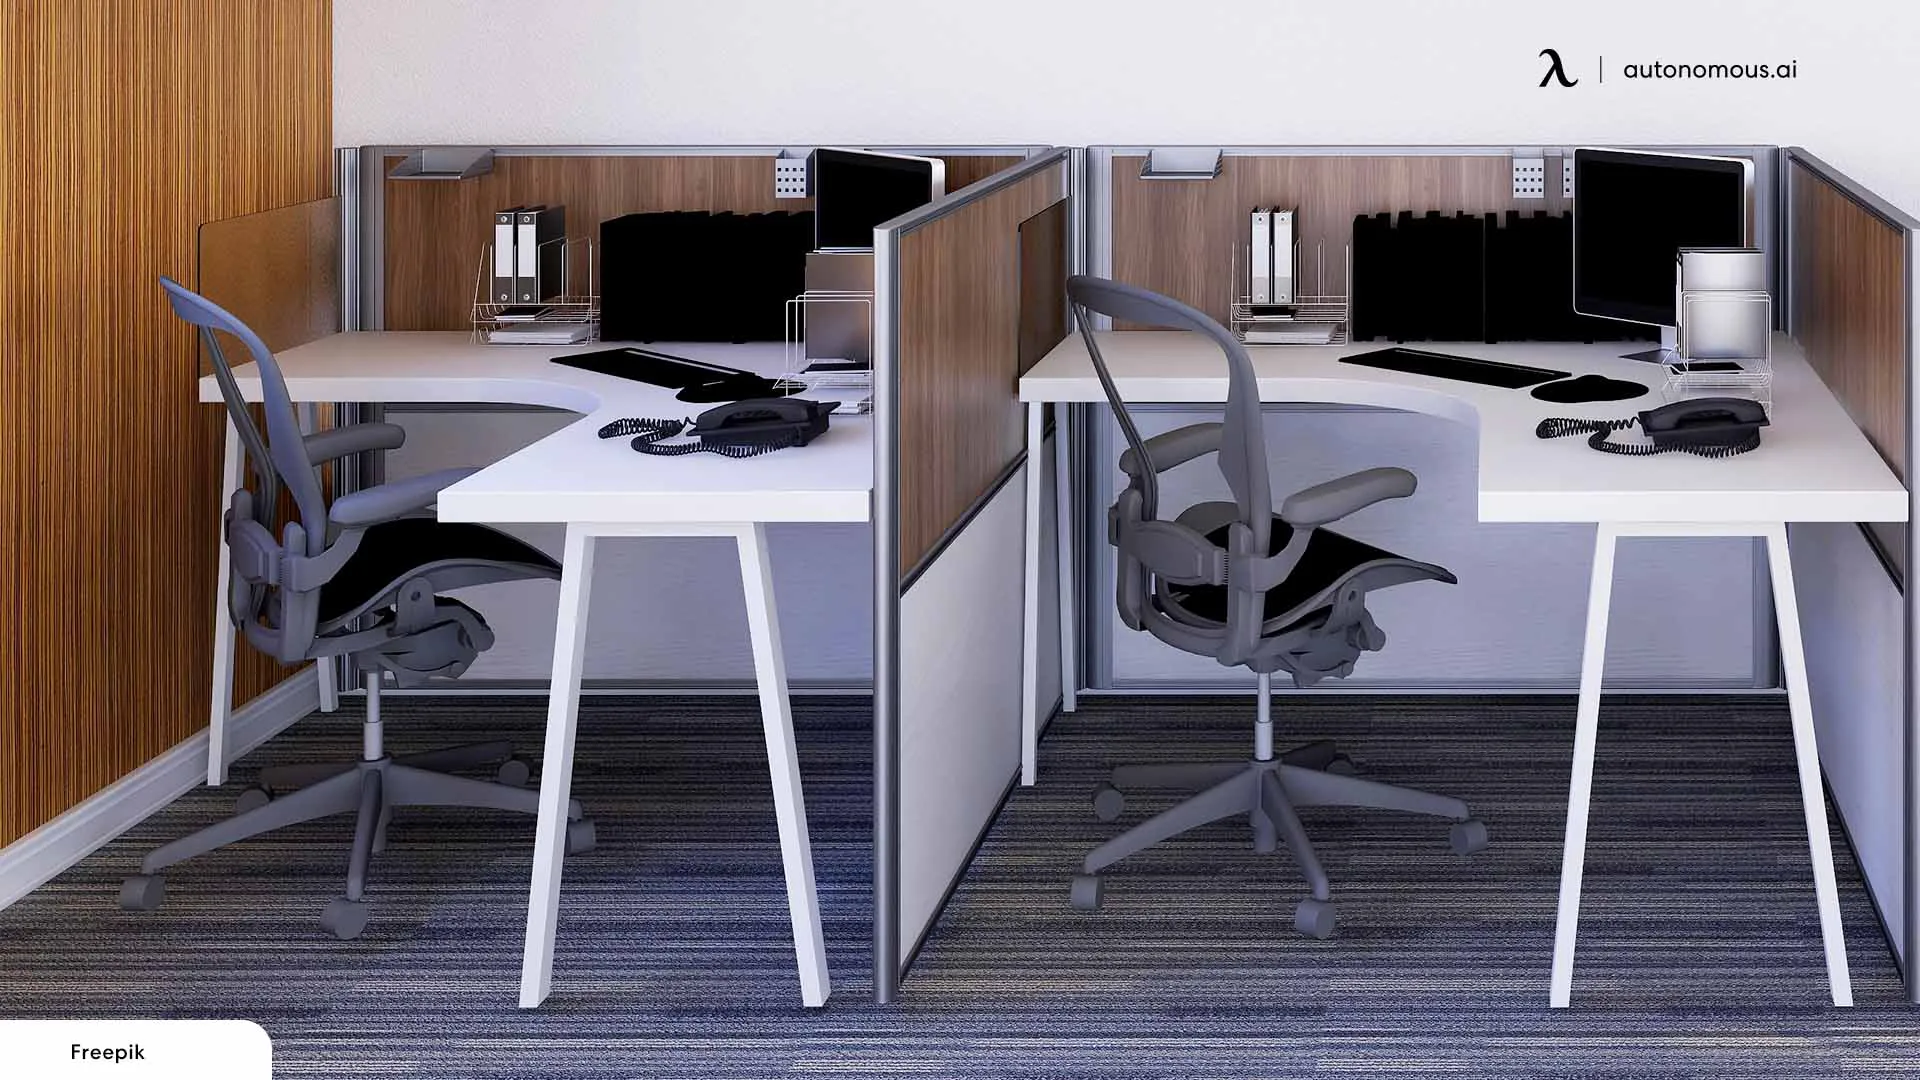 Boost Your Productivity and Style With These 60 Creative Cubicle Decor Ideas